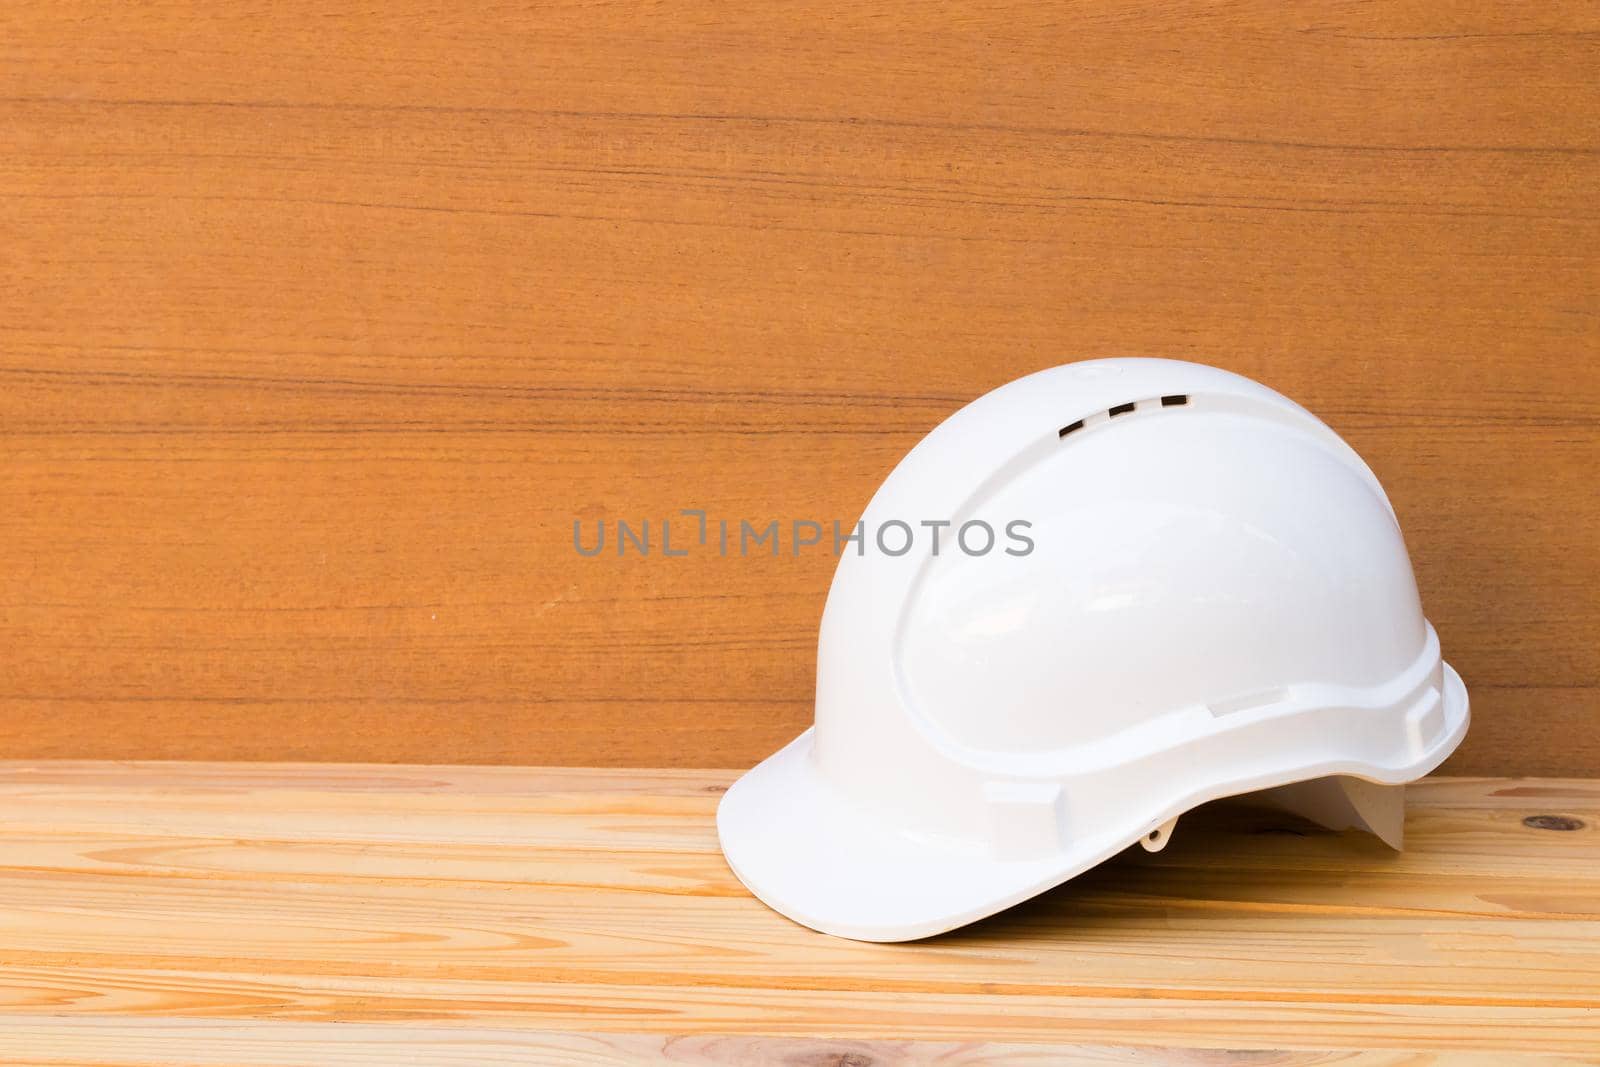 white safety helmet plastic construction of engineering on wood floor table background with copy space add text